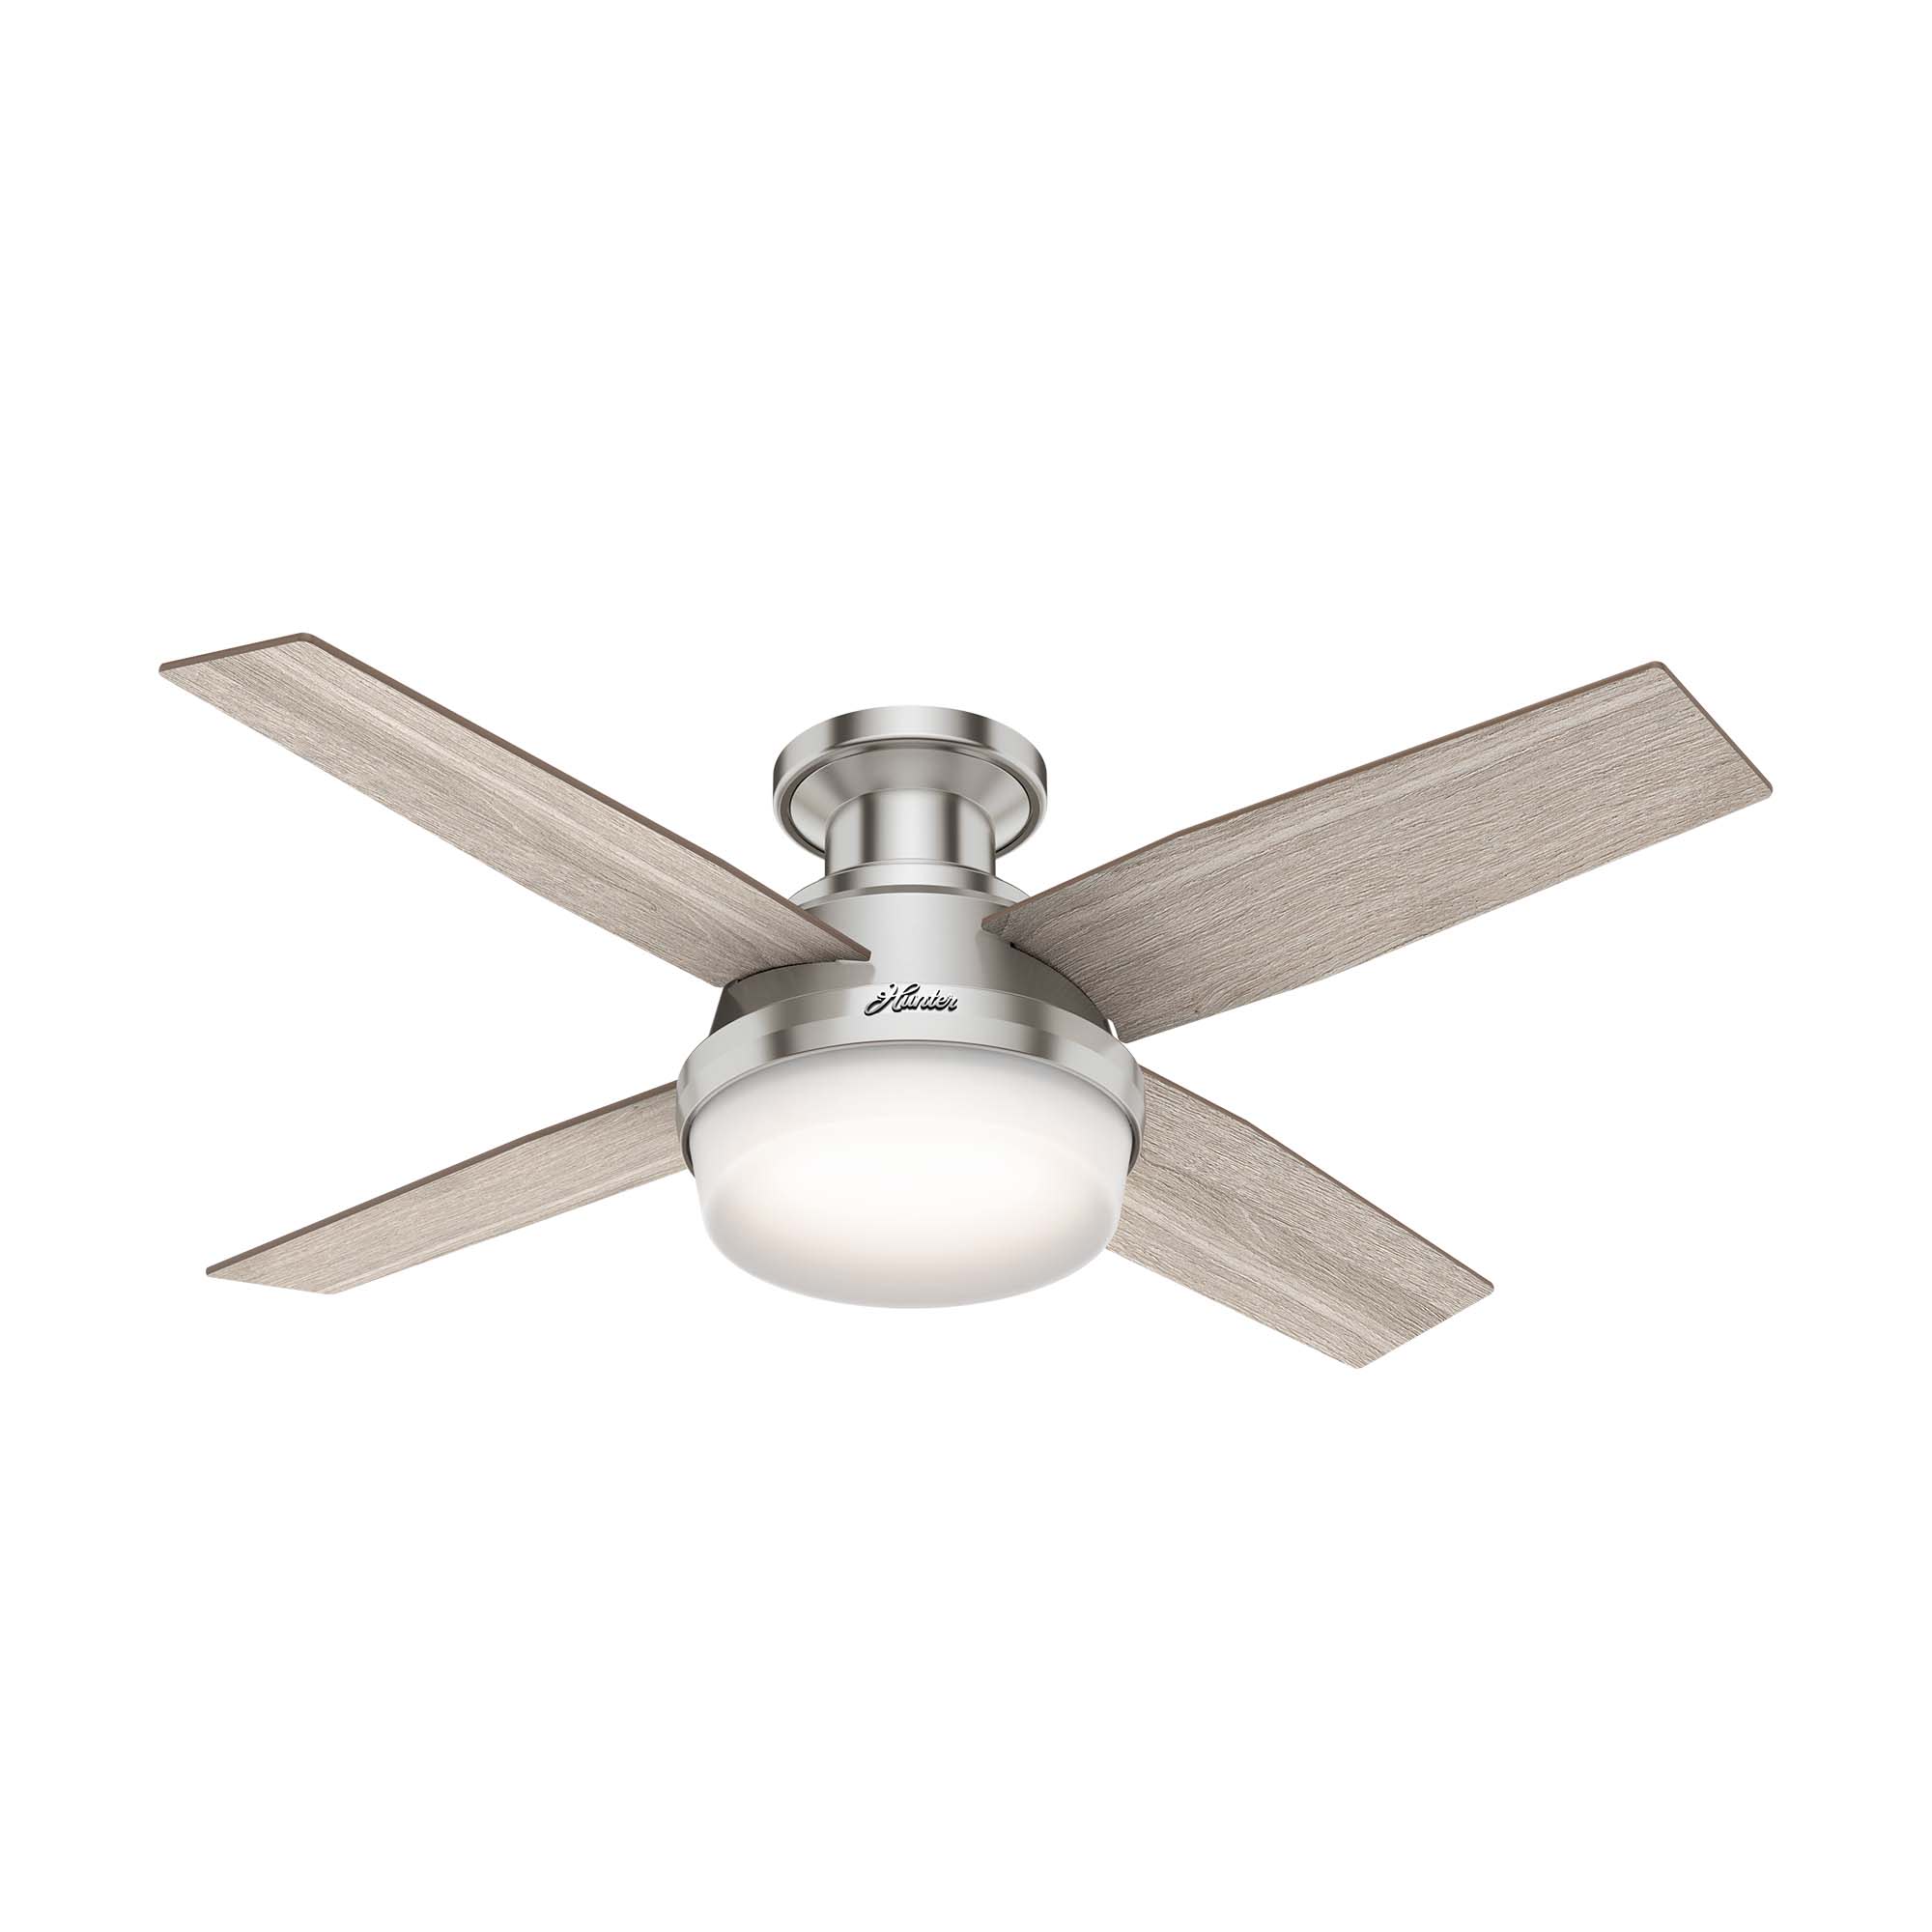 Hunter Dempsey 44 In Brushed Nickel Indoor Flush Mount Ceiling Fan With Light And Remote 4 Blade The Fans Department At Lowes Com